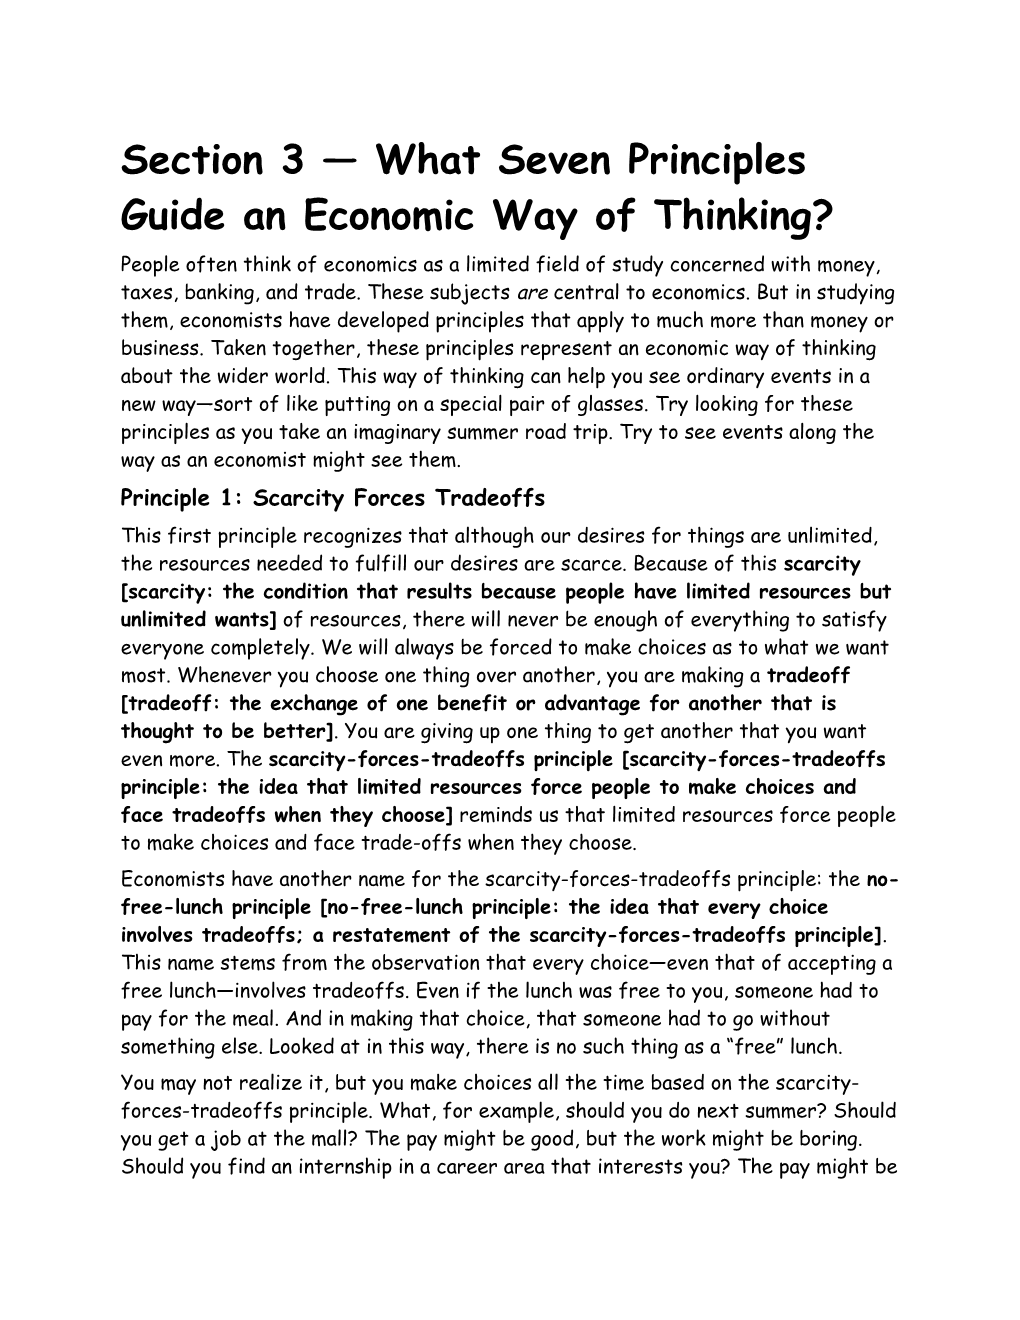 Section 3 What Seven Principles Guide an Economic Way of Thinking?